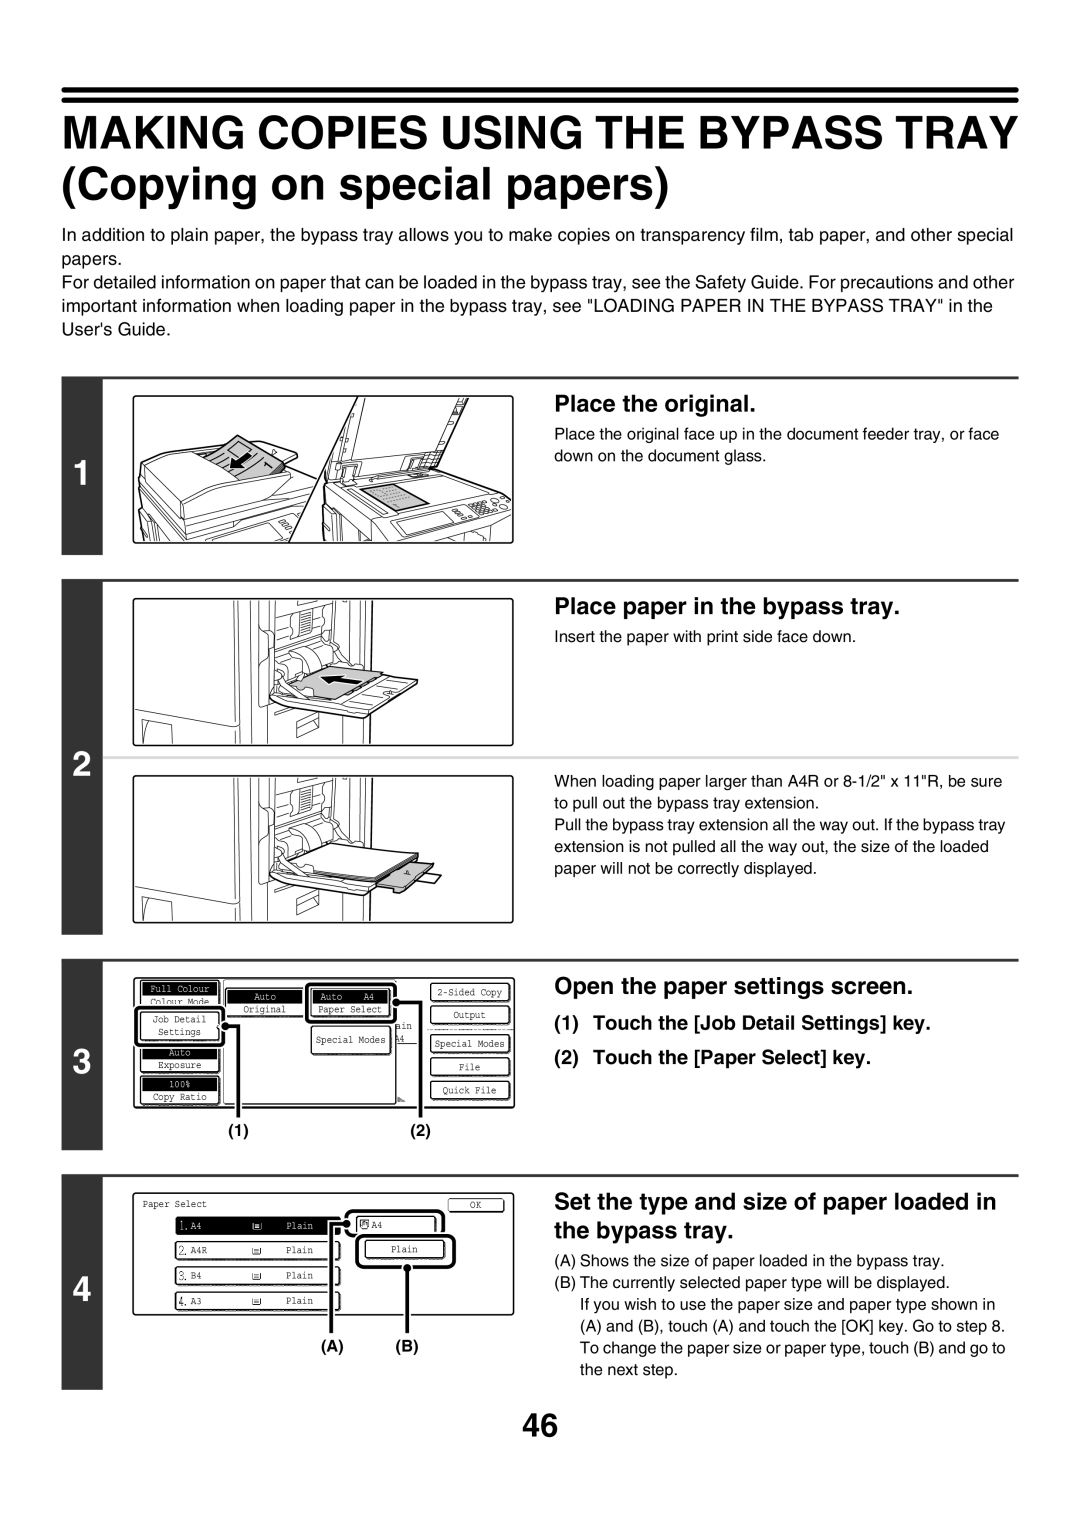 Sharp MX-4500N, MX-4501N MAKING COPIES USING THE BYPASS TRAY Copying on special papers, Place paper in the bypass tray 